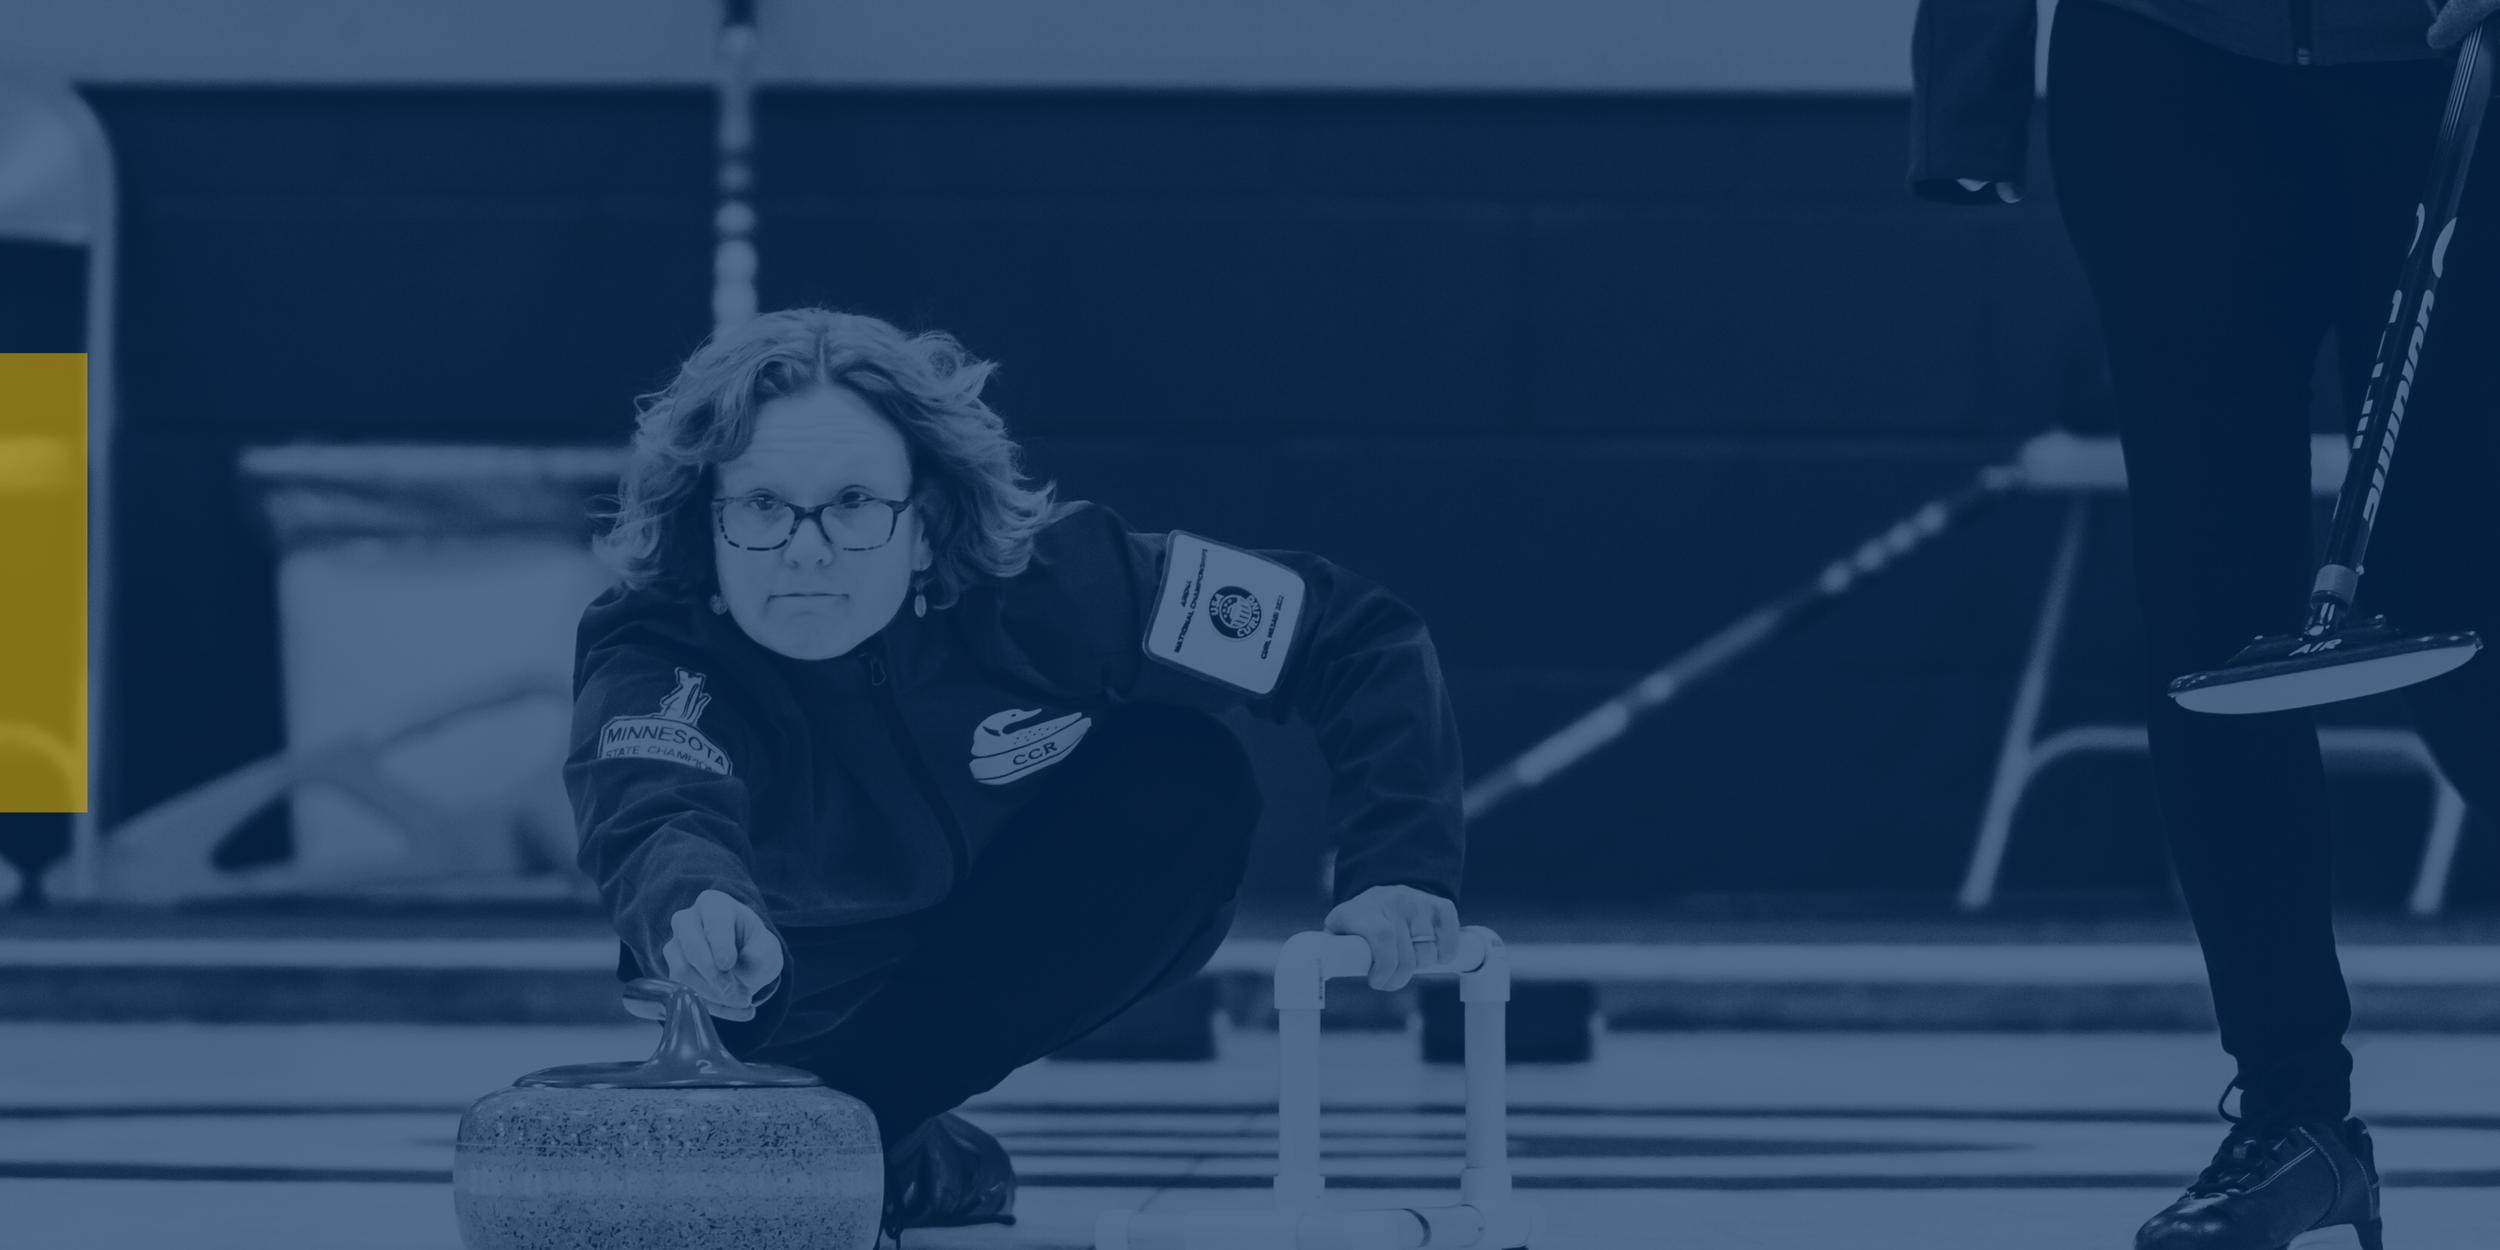 ABOUT MEMBERSHIP — USA CURLING